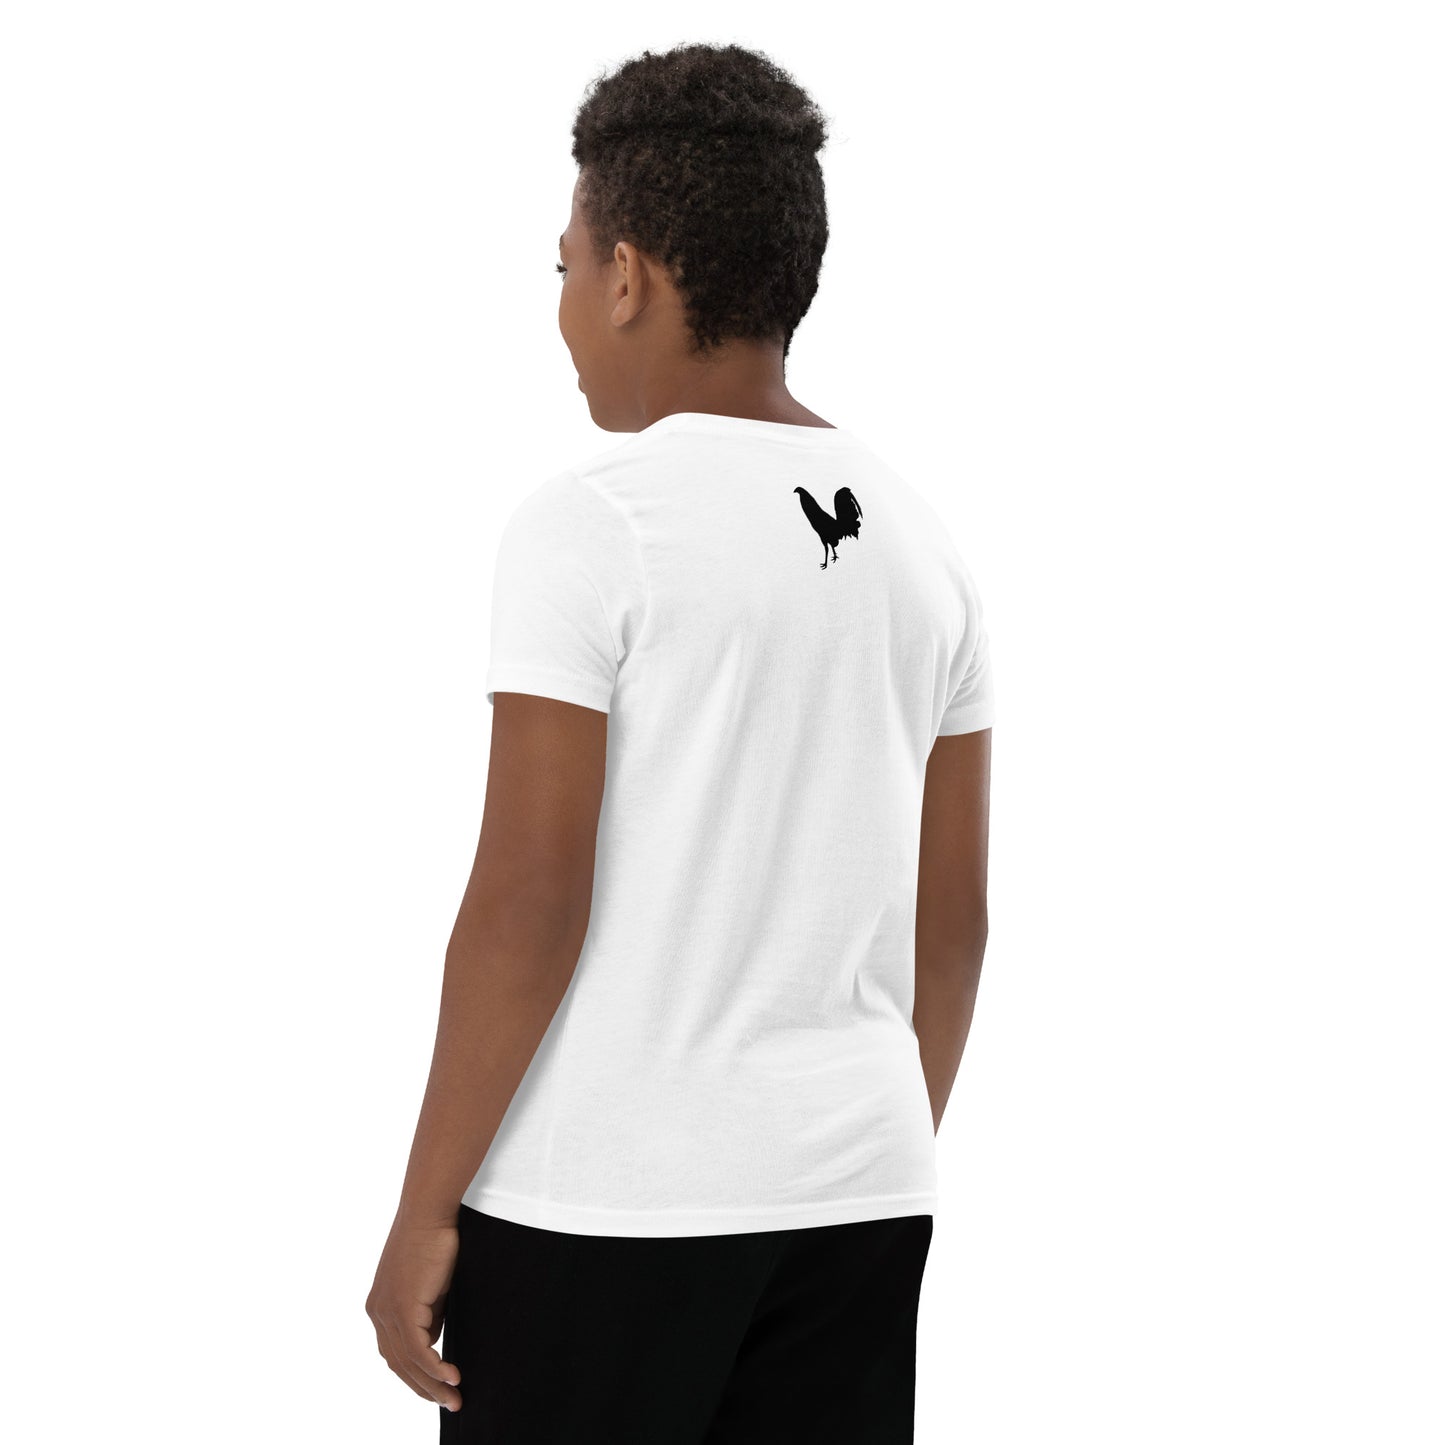 NUTRITION FACTS Gamefowl Rooster Light Youth Tshirt